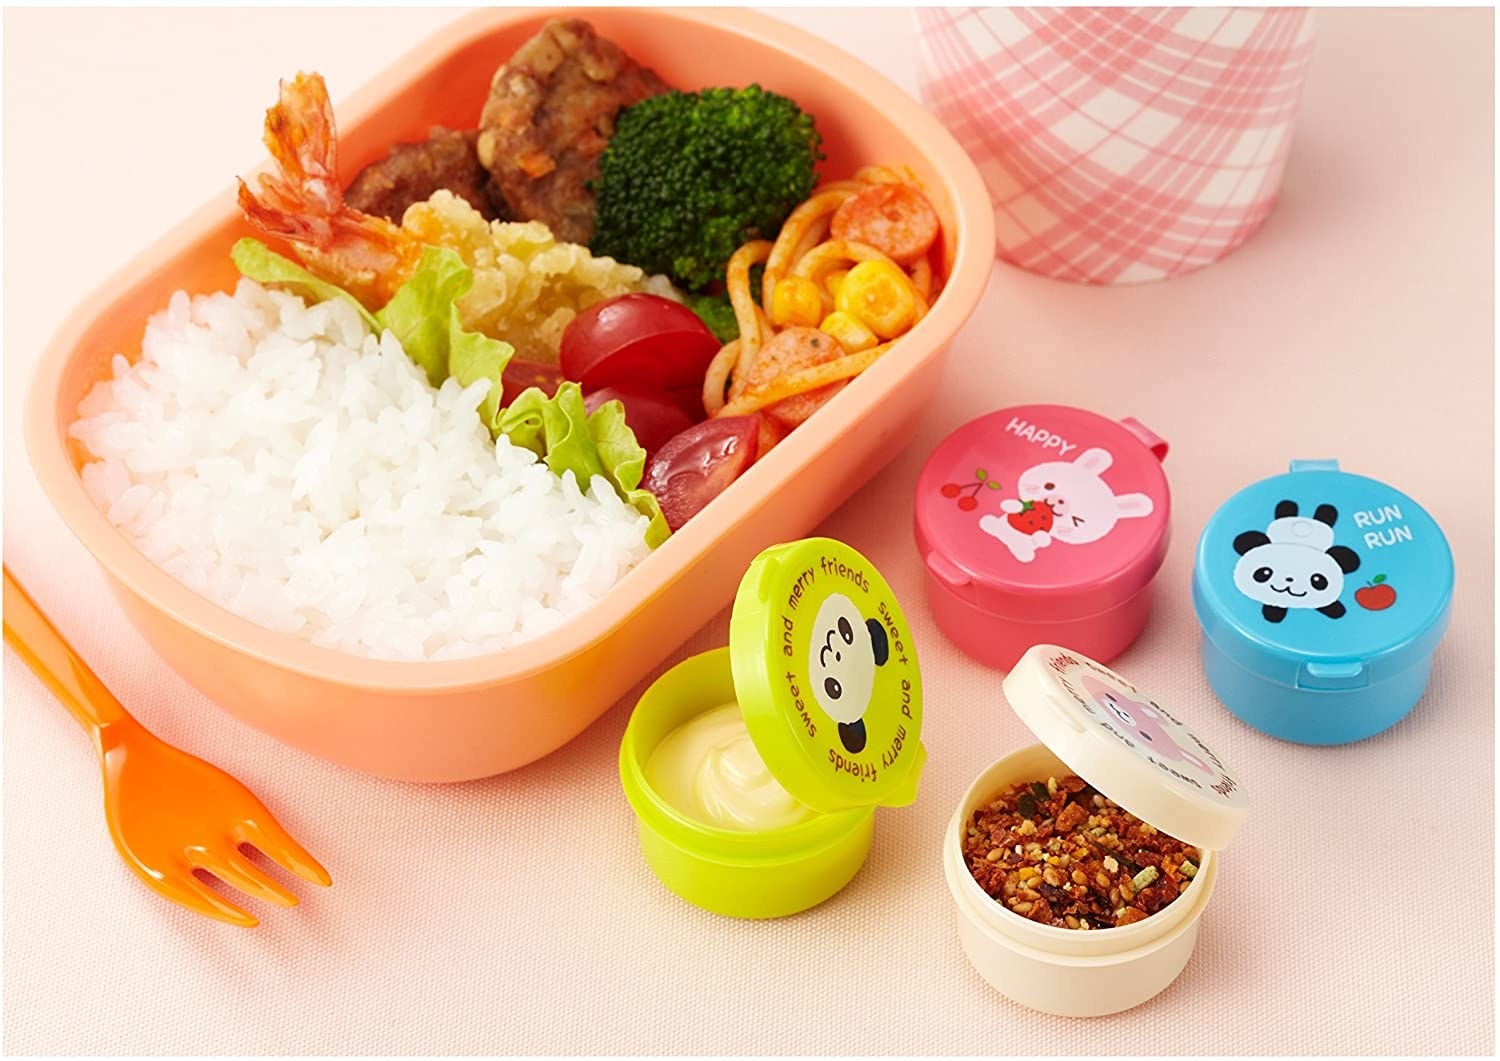 Four condiment holders next to a bento box of rice and stir fry